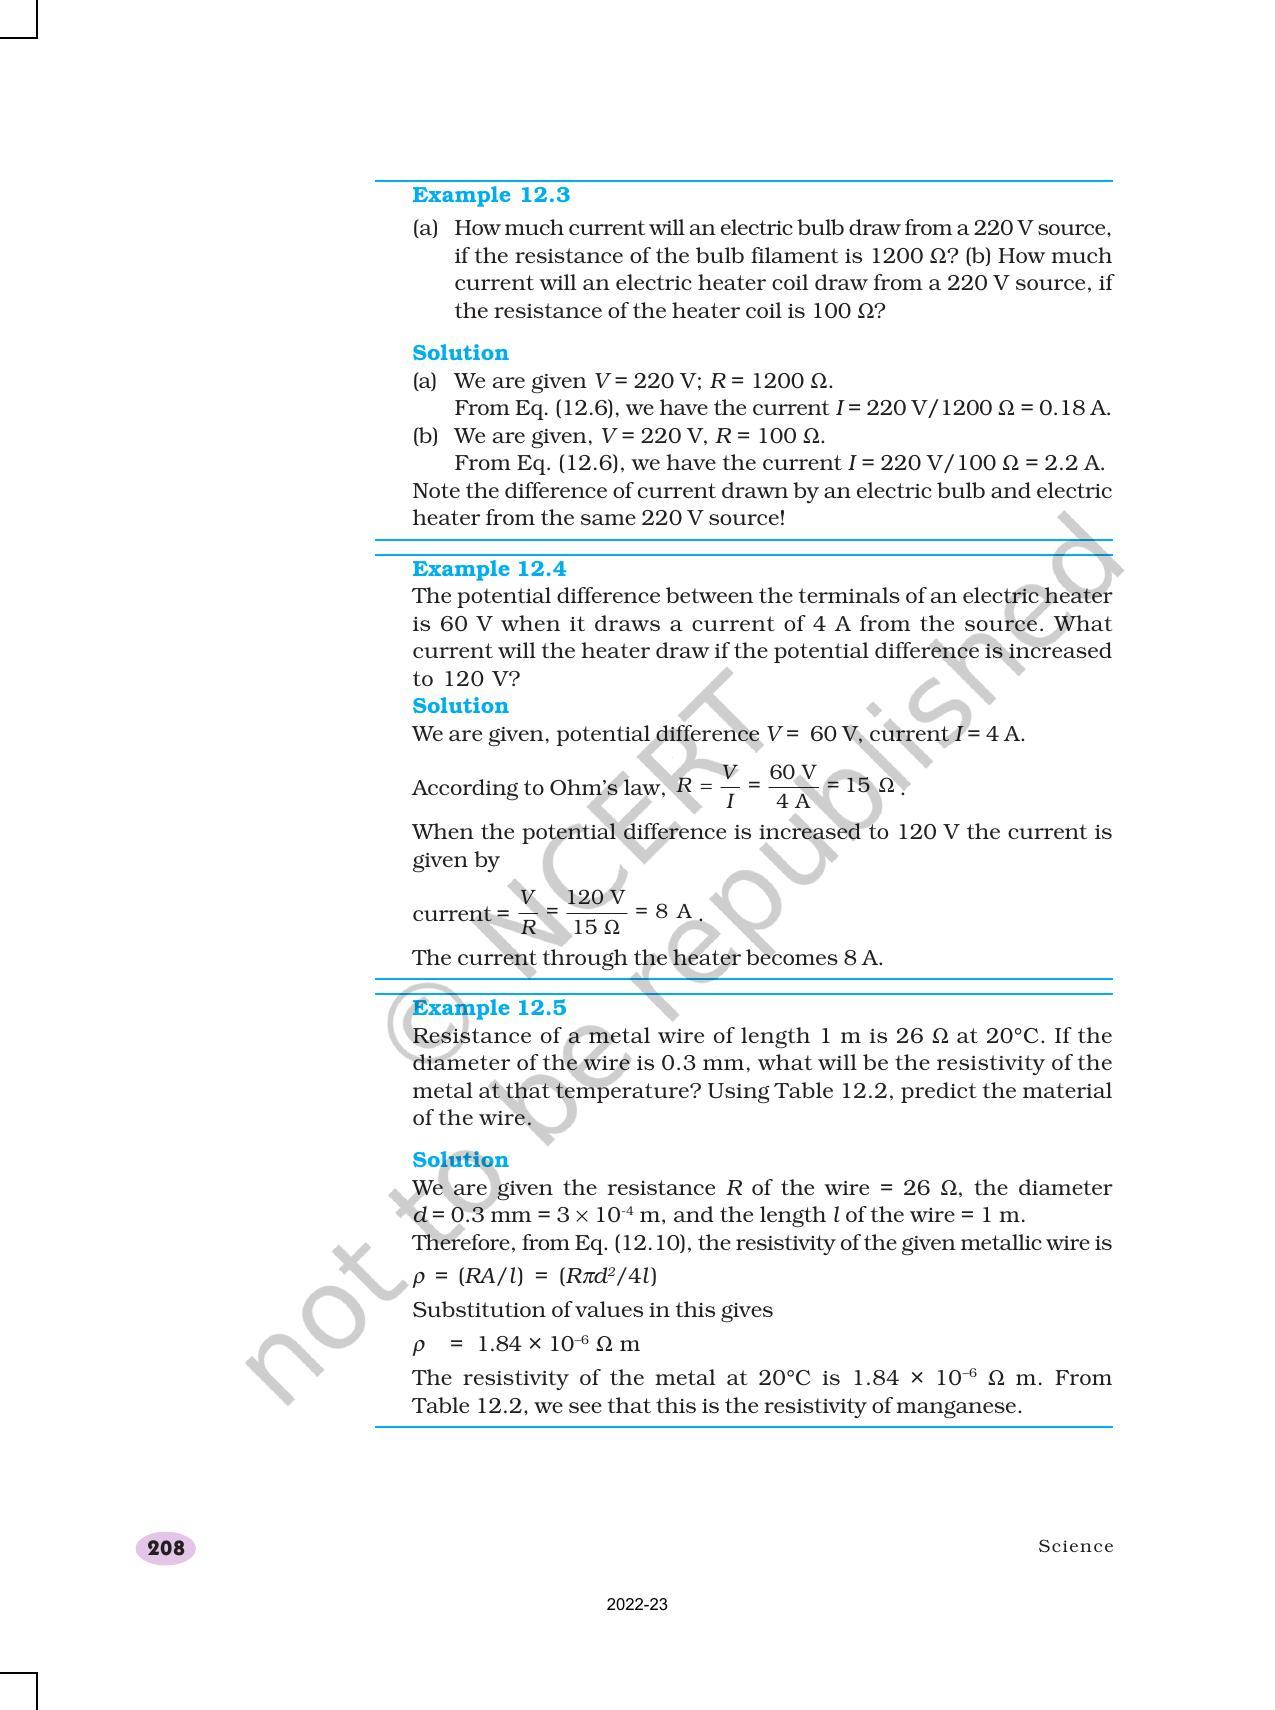 NCERT Book for Class 10 Science Chapter 12 Electricity - Page 10